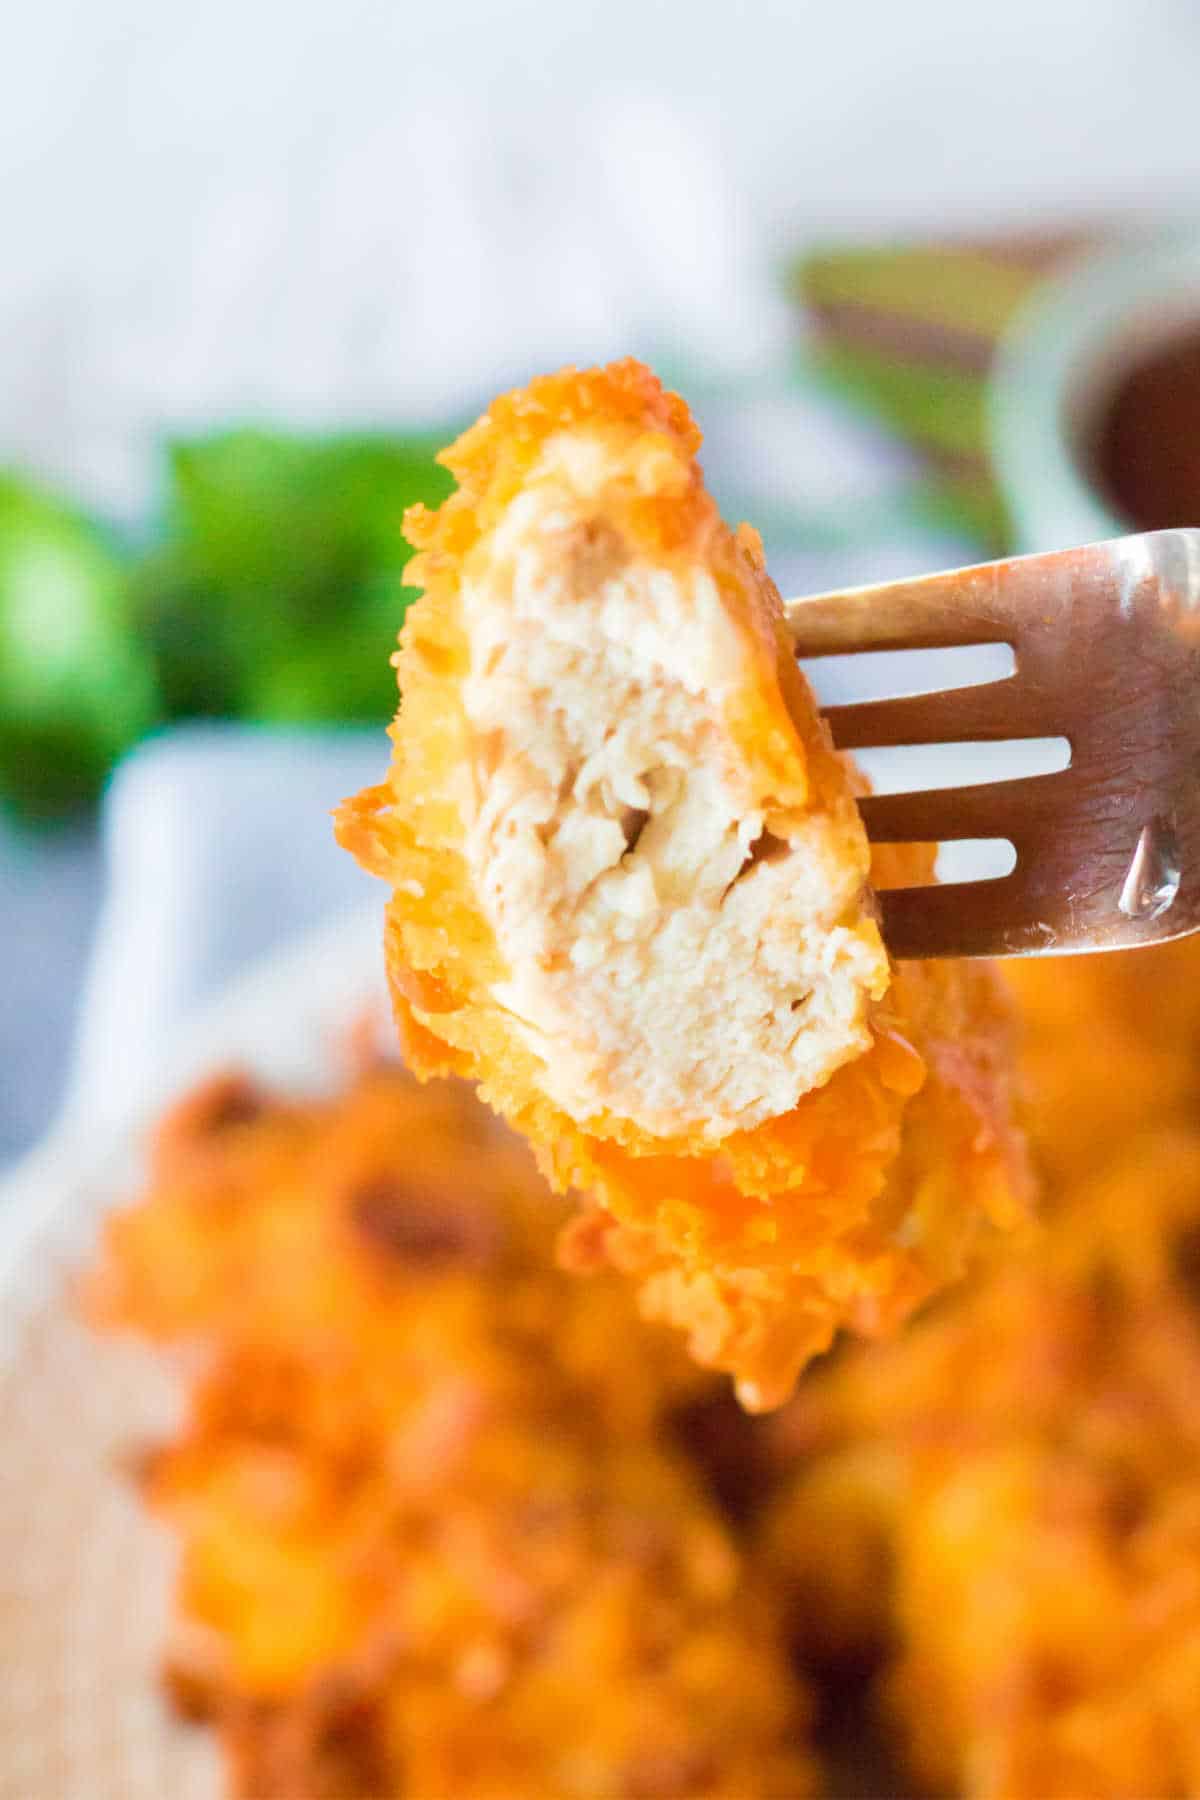 A piece of chicken tender on a fork.